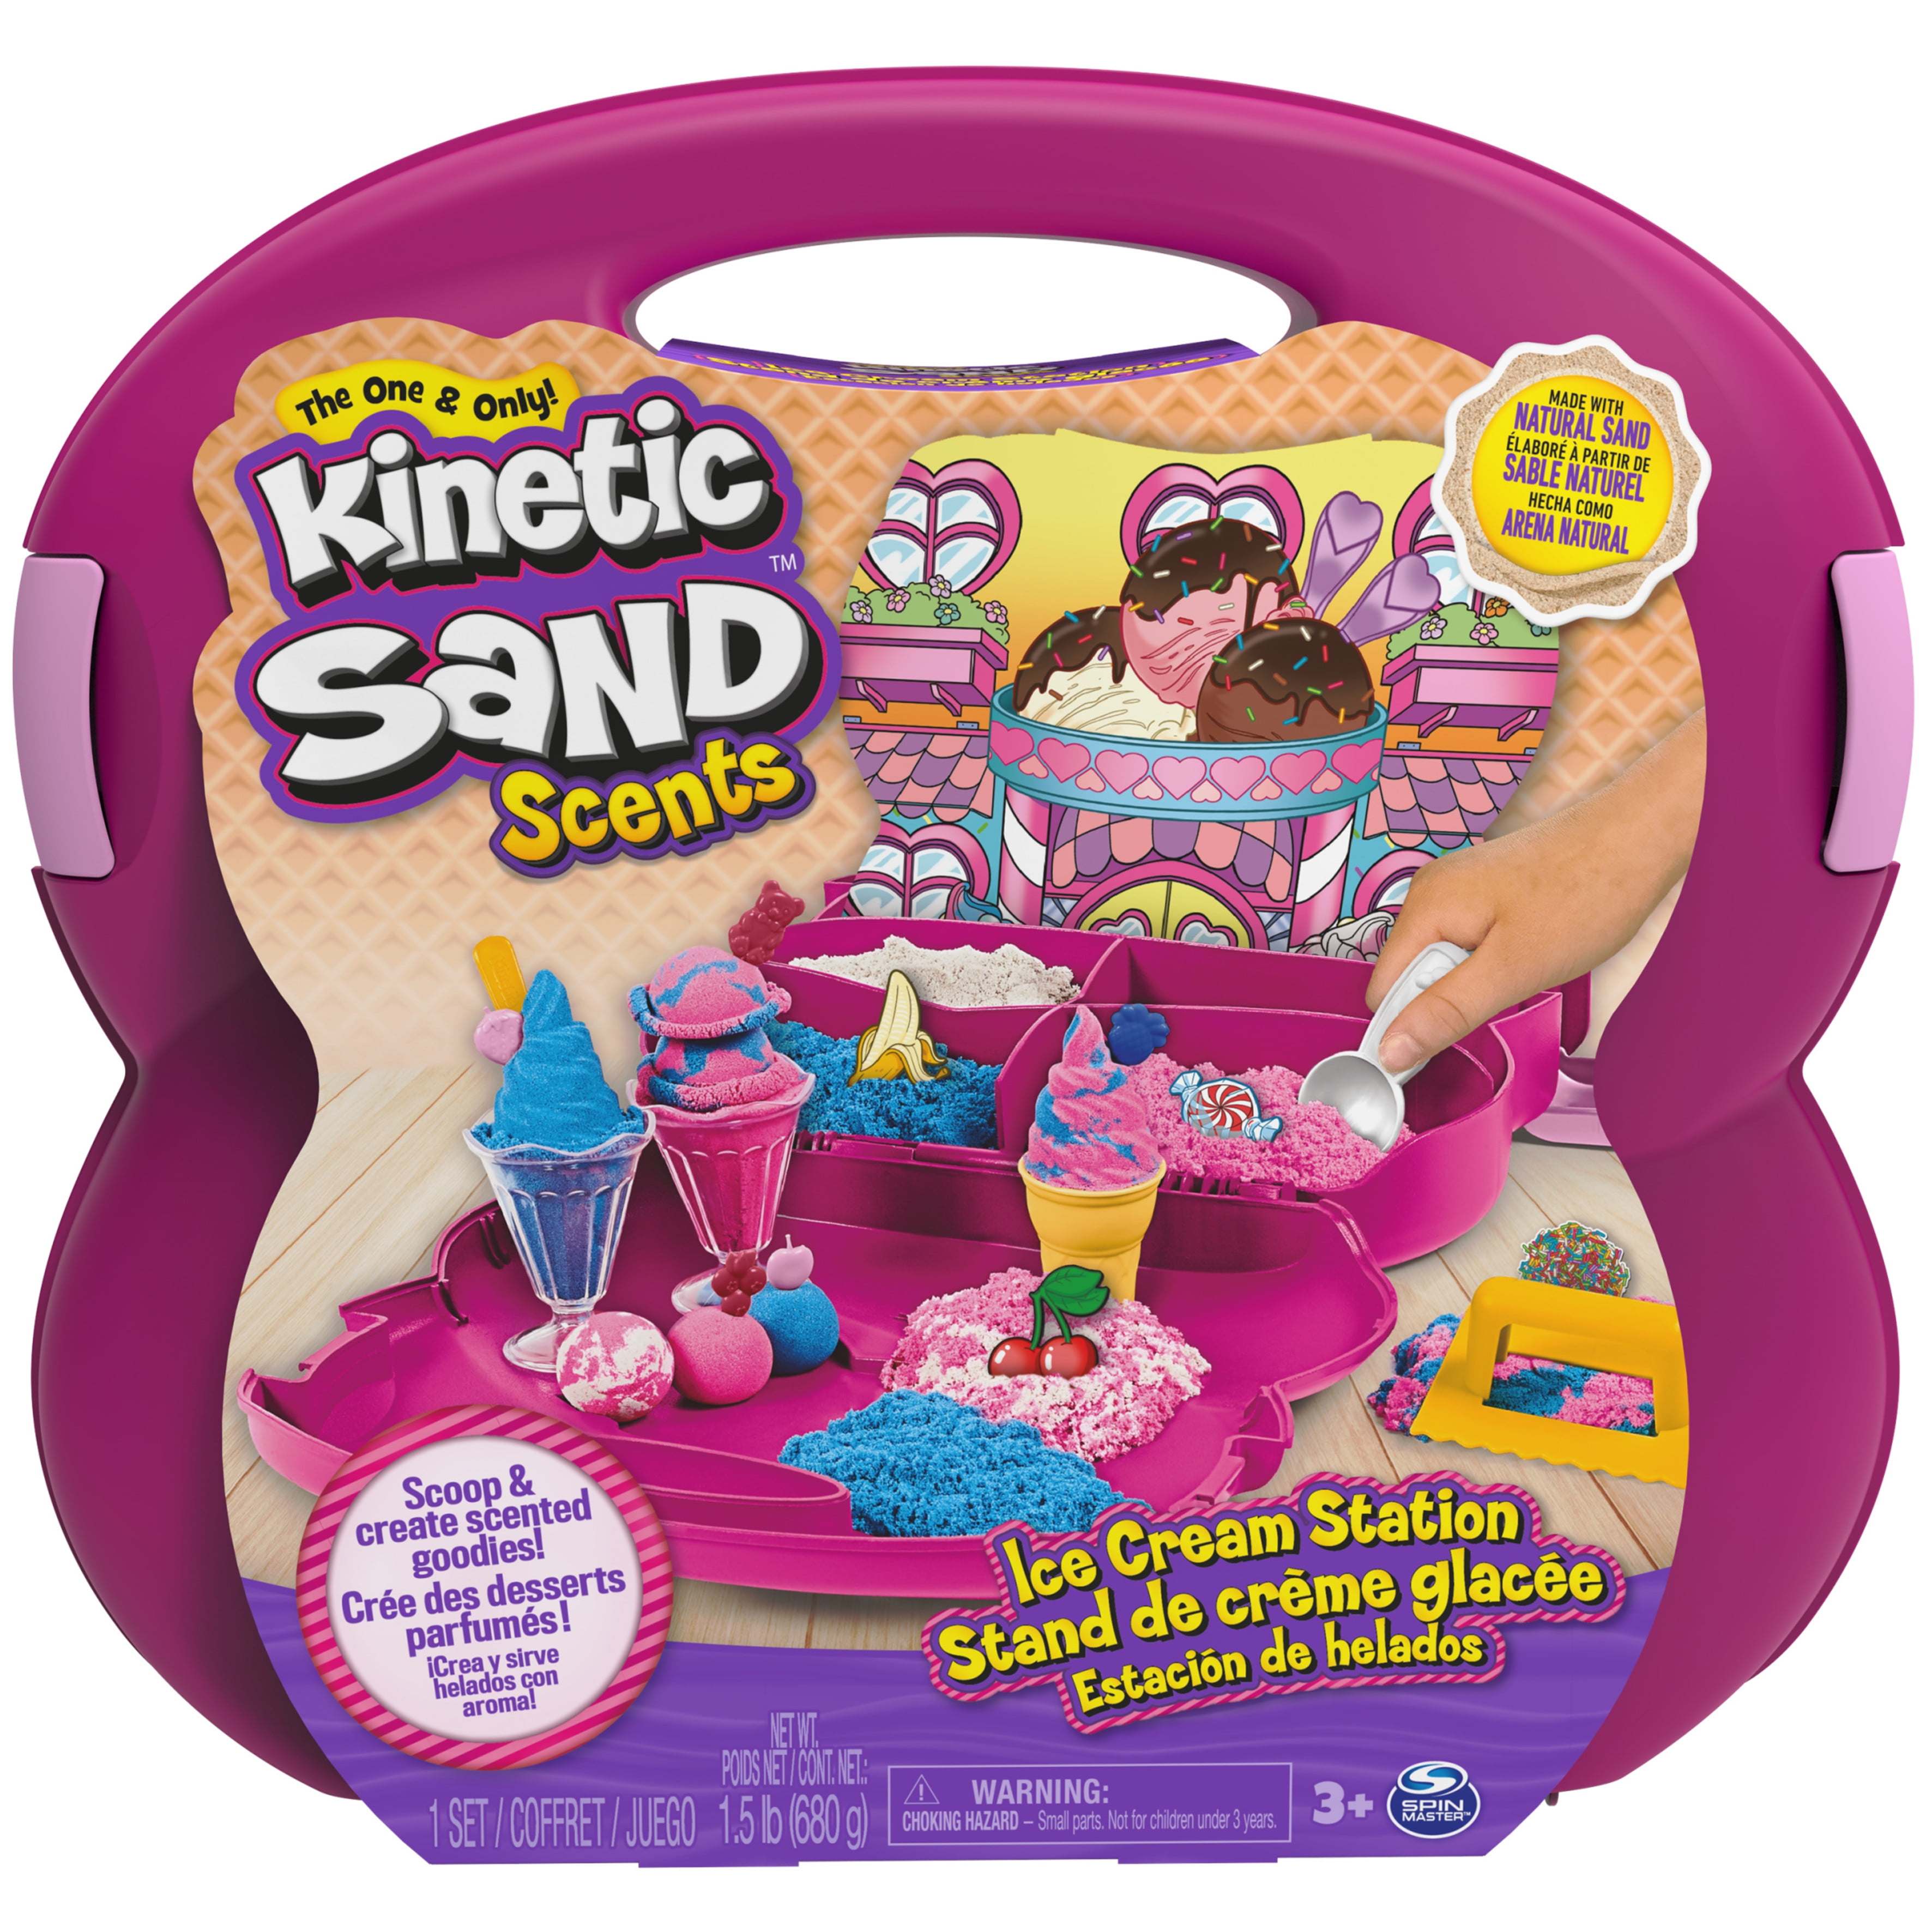 Kinetic Sand Scents, Ice Cream Station Playset